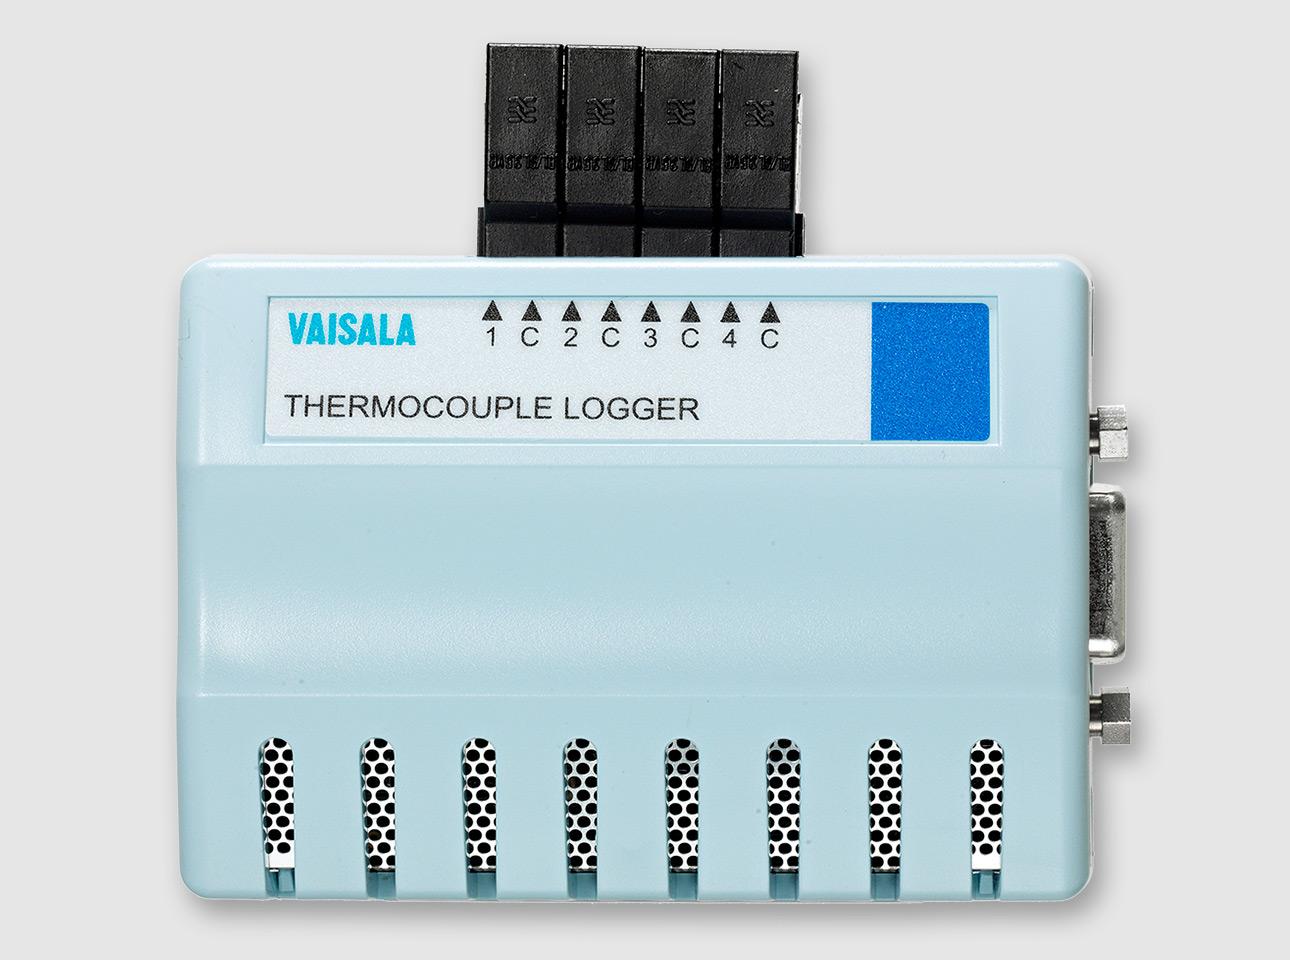 The DL1700 thermocouple data loggers provide accurate temperature data acquisition, remote alarming, and continuous monitoring.